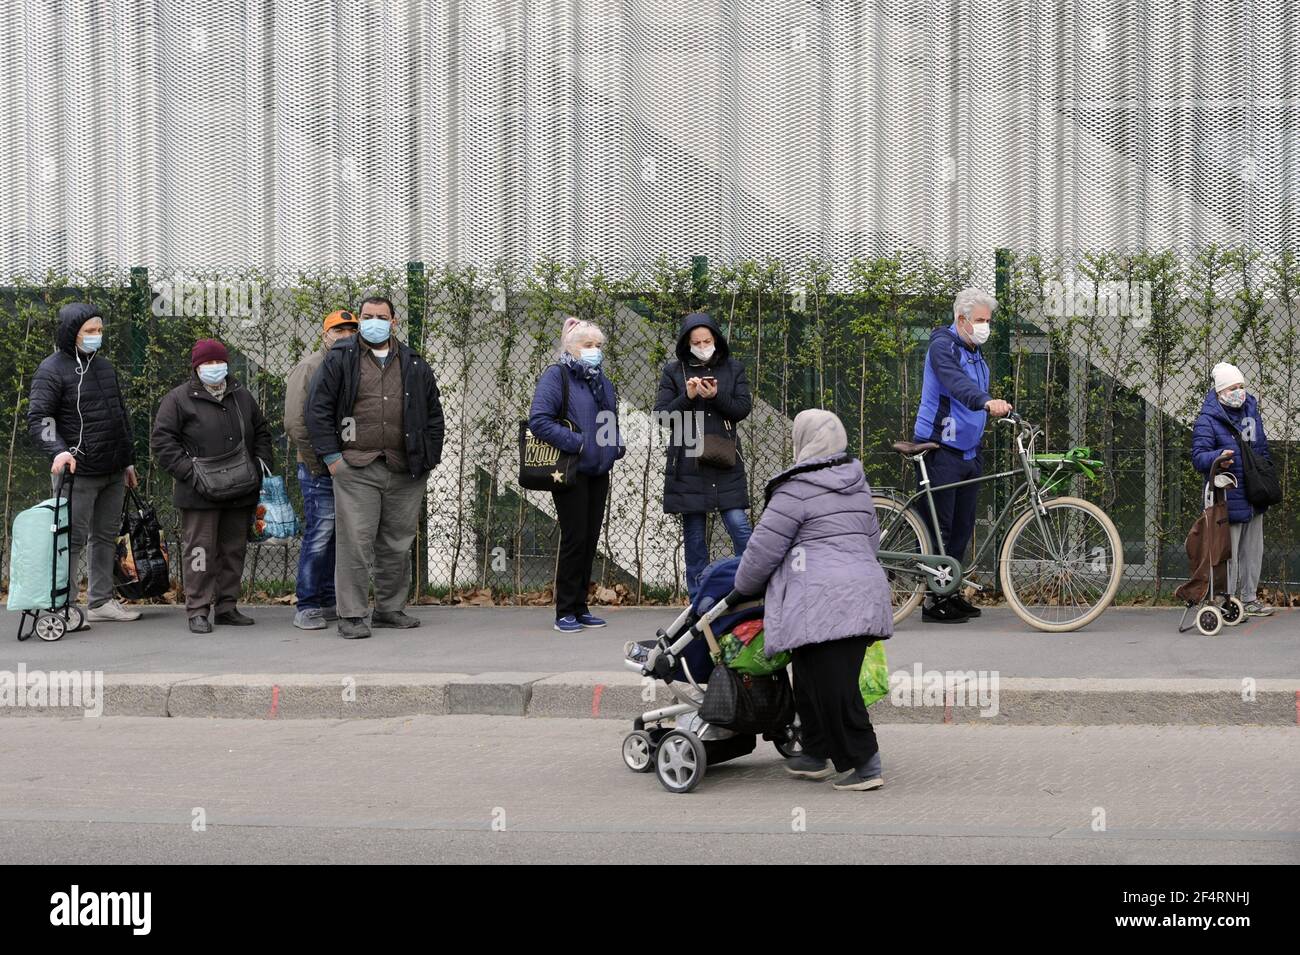 Milan (Italy), the non-profit organisation Pane Quotidiano (Daily Bread) distributes essential foodstuffs to people in economic difficulty due to the crisis caused by the Coronavirus epidemic. More and more social groups are affected, and every day the queue gets longer. Stock Photo